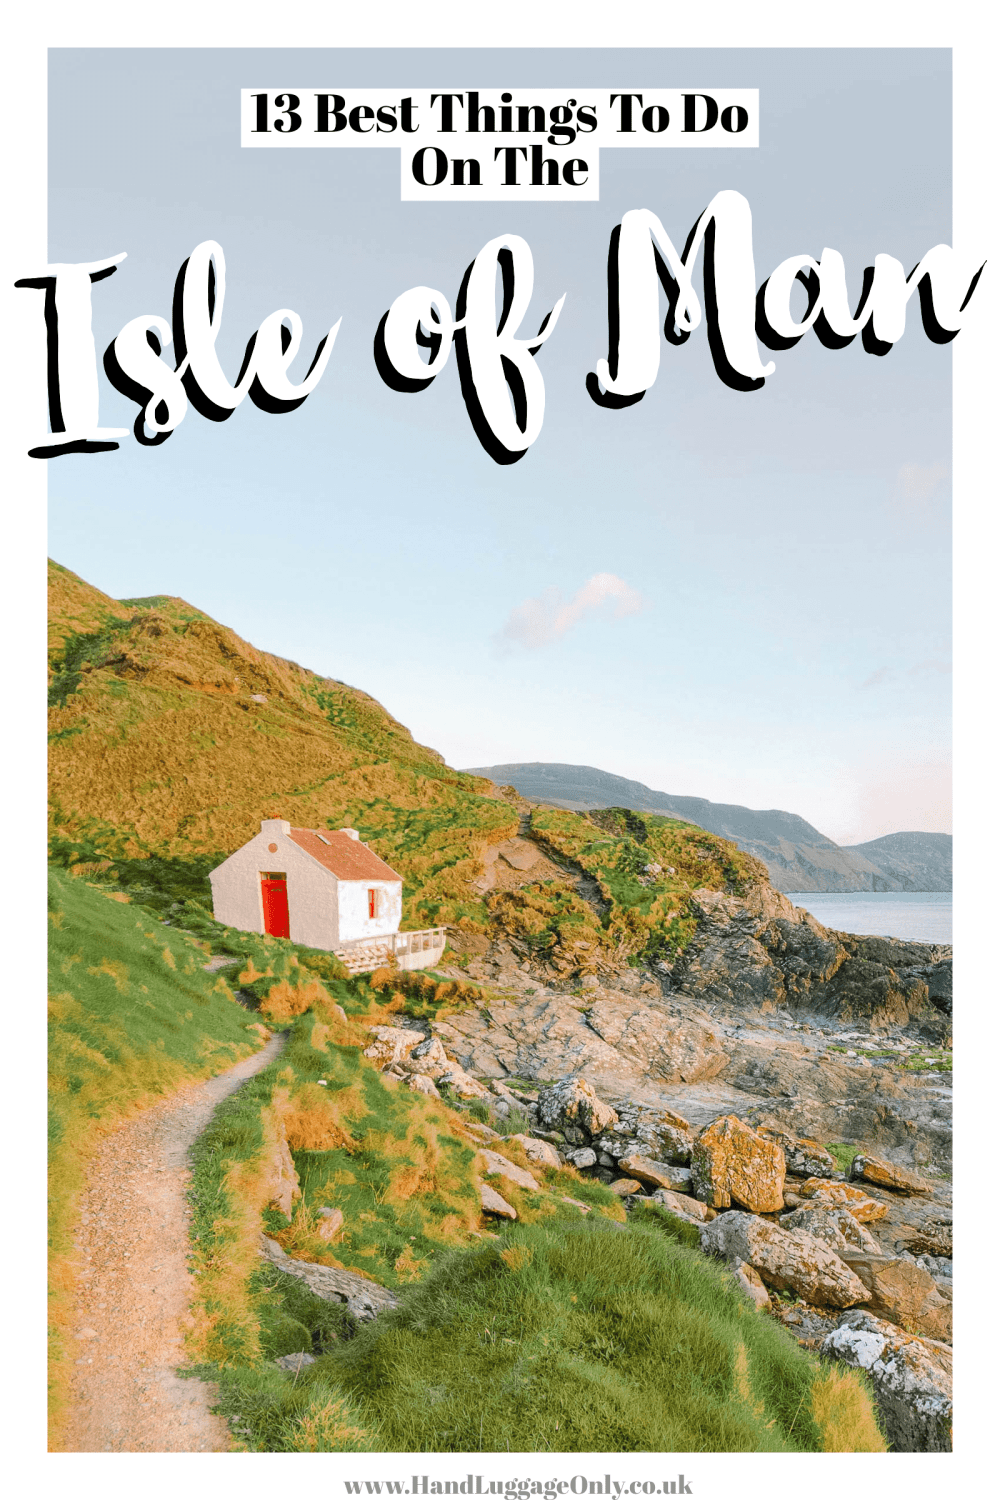 Best Things To Do On The Isle Of Man (1)